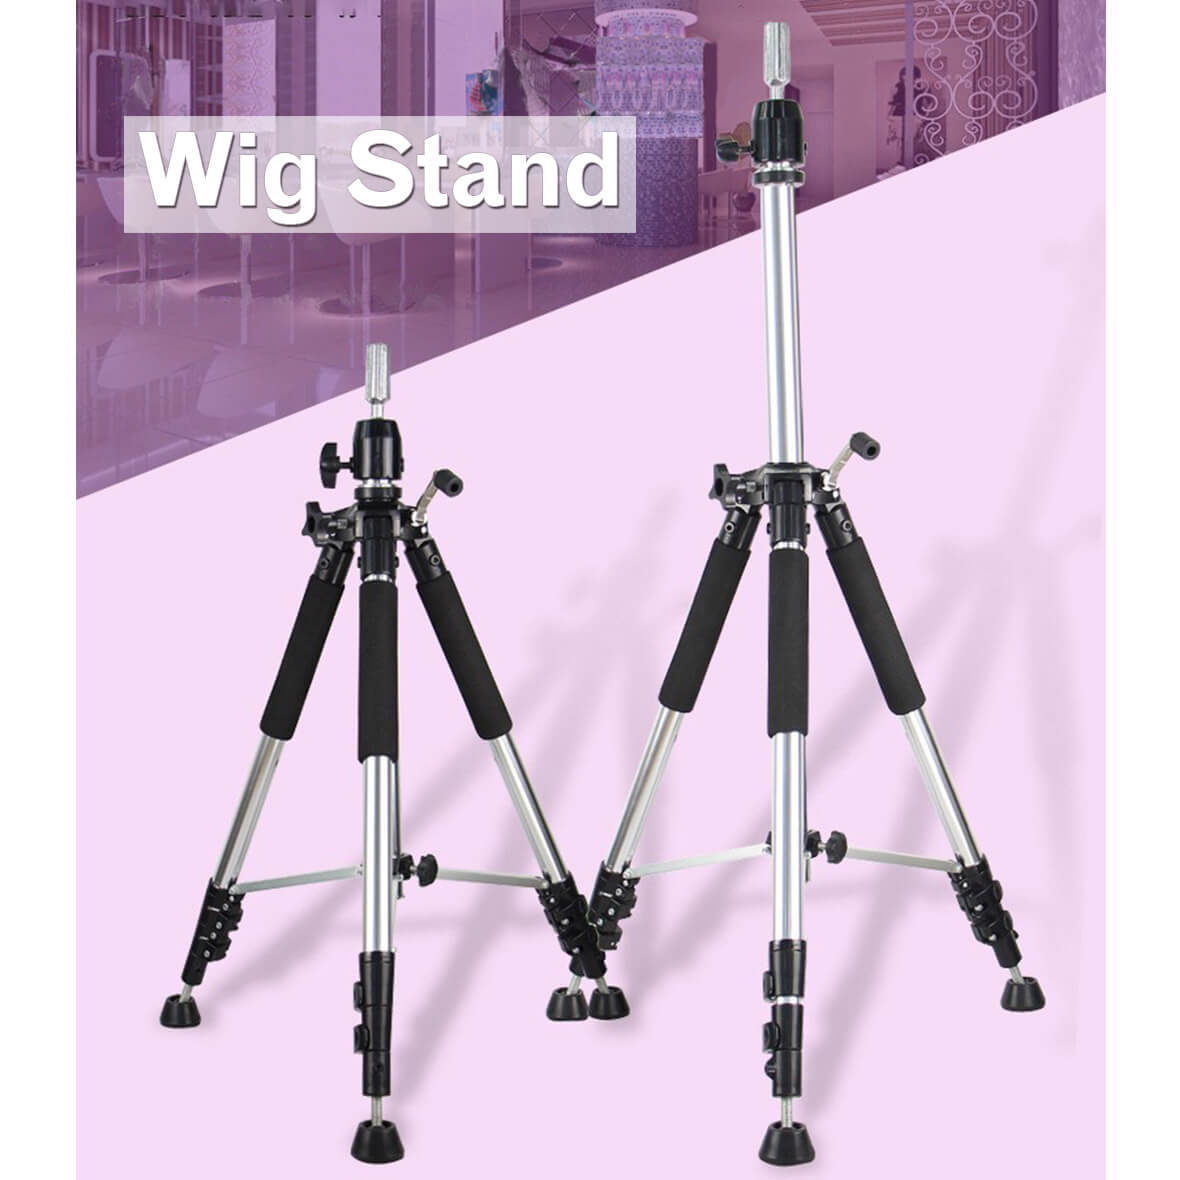 Xtrend Metal Adjustable Wig Stand Tripod Mannequin Head Wig Stand